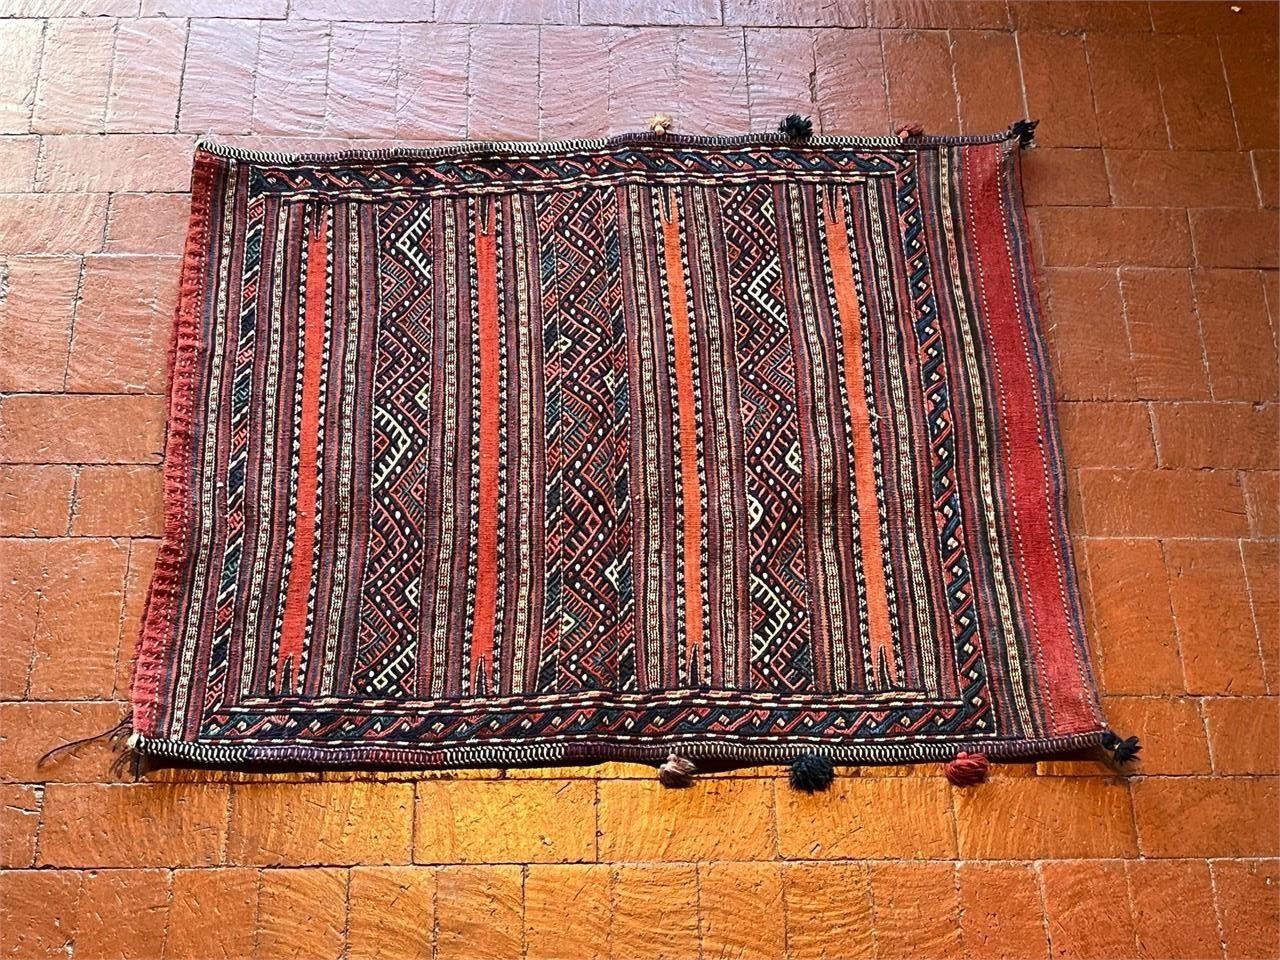 Two Sided Woven Folk Rug